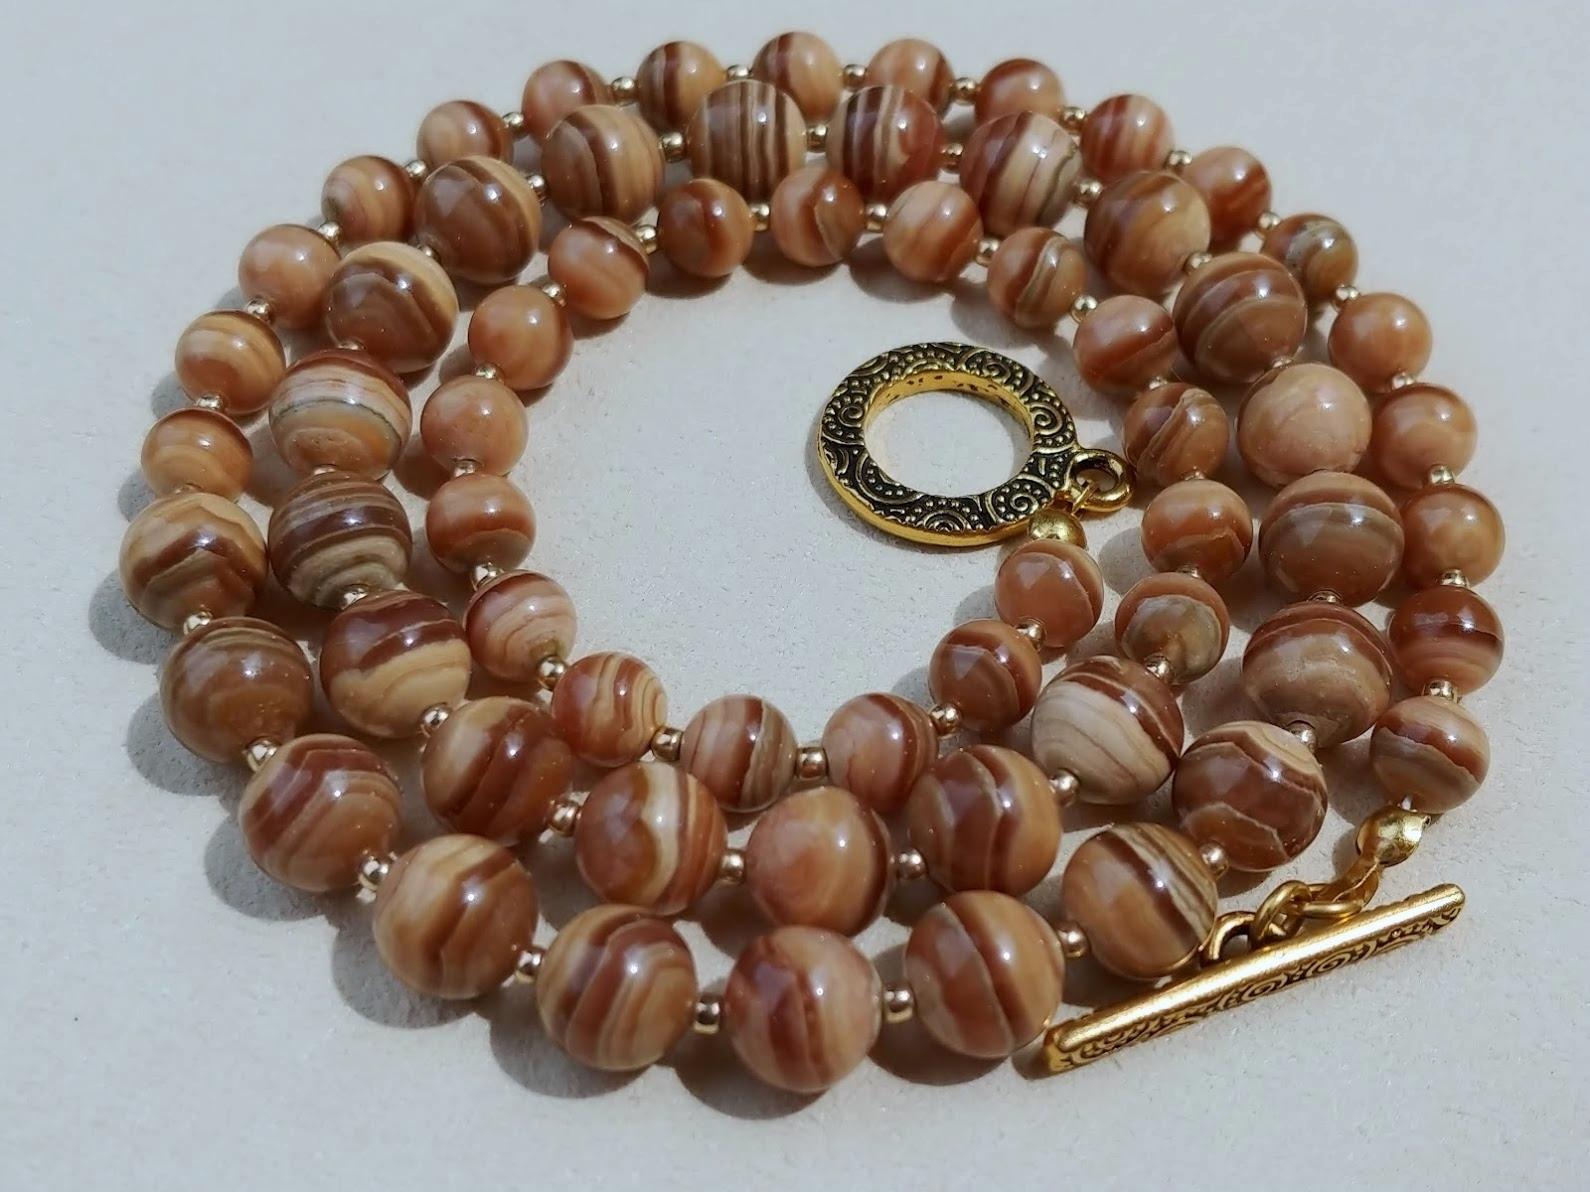 The length of the necklace is 23 inches (58cm). The size of the smooth round beads varies from 6.5 to 8.5 mm.
Natural light brown rhodochrosite. Authentic, natural color not treated in any way. Superior higher grade! Beautiful, interesting peachy